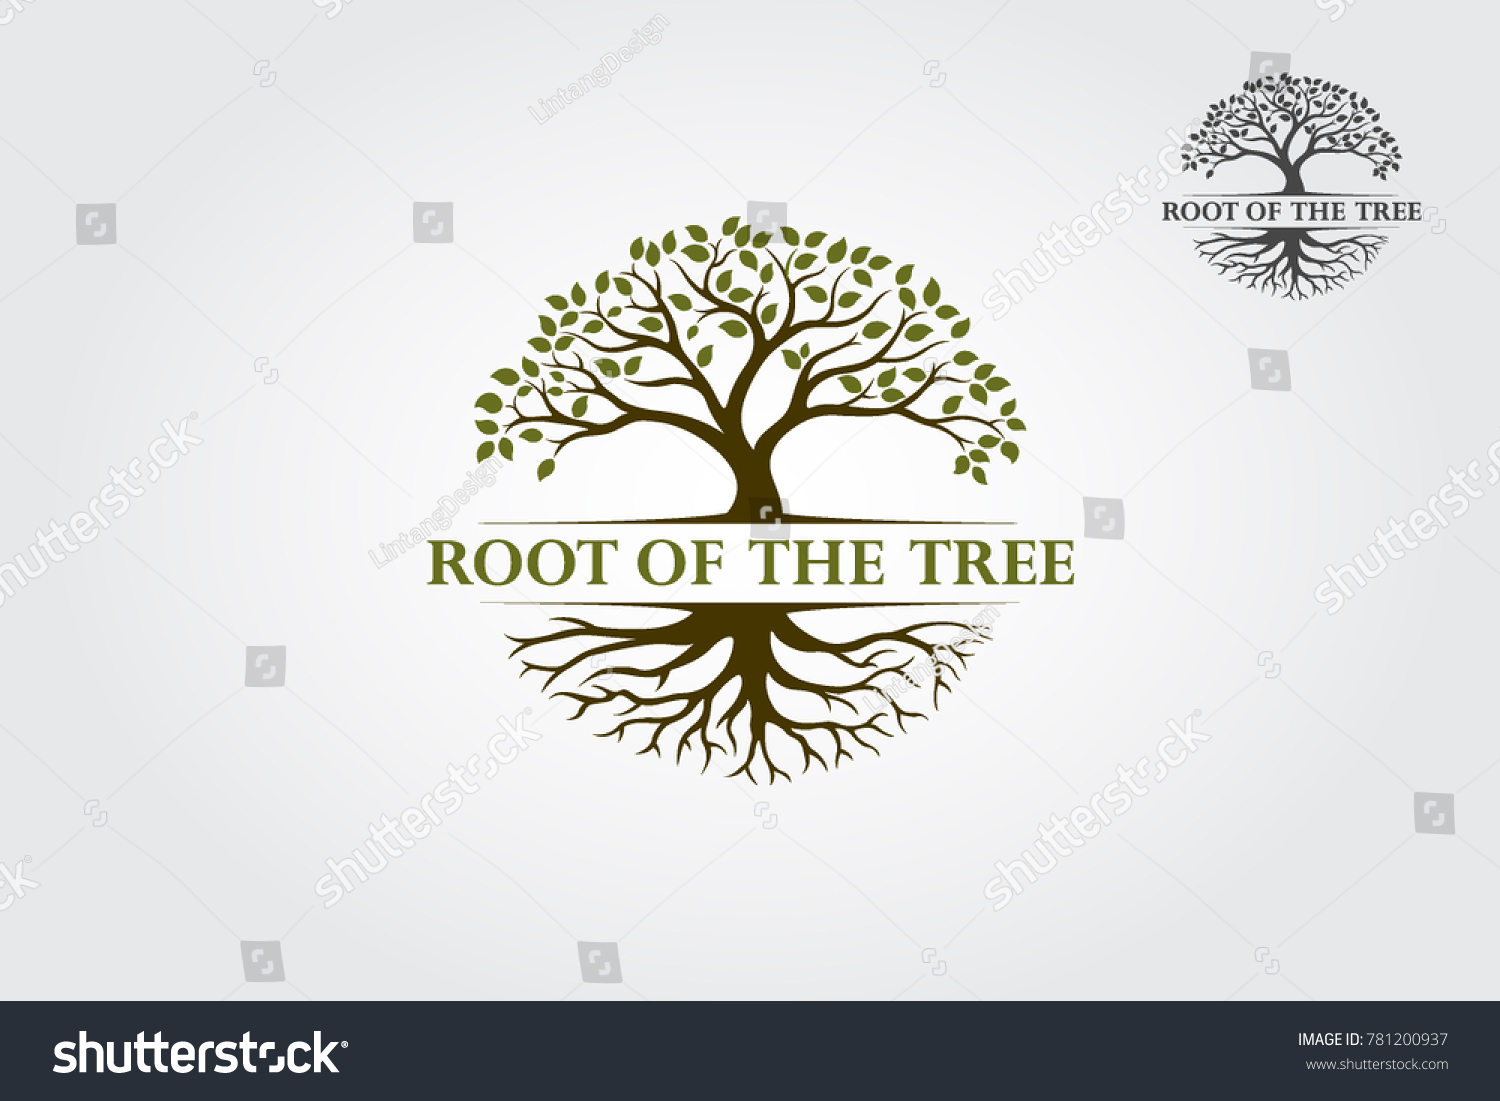 Root Of The Tree logo illustration. Vector silhouette of a tree. #781200937